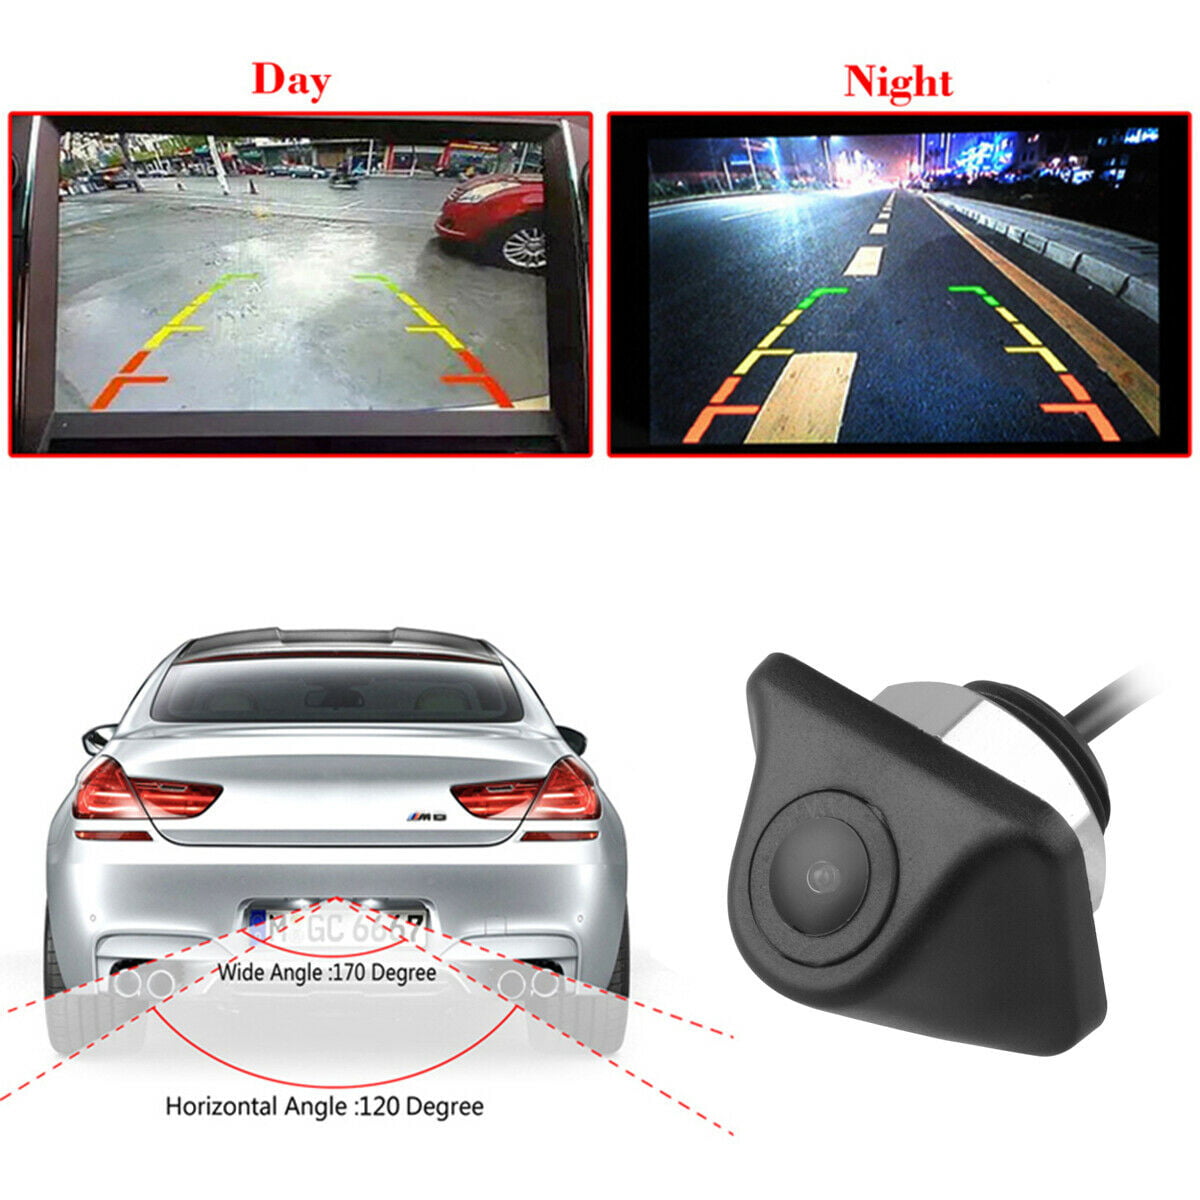 High Light Sensitivity for Nighttime Performance Parking Lane Display Option Voxx ACAM4 HD Wide Angle License Plate Mounted Backup Camera 